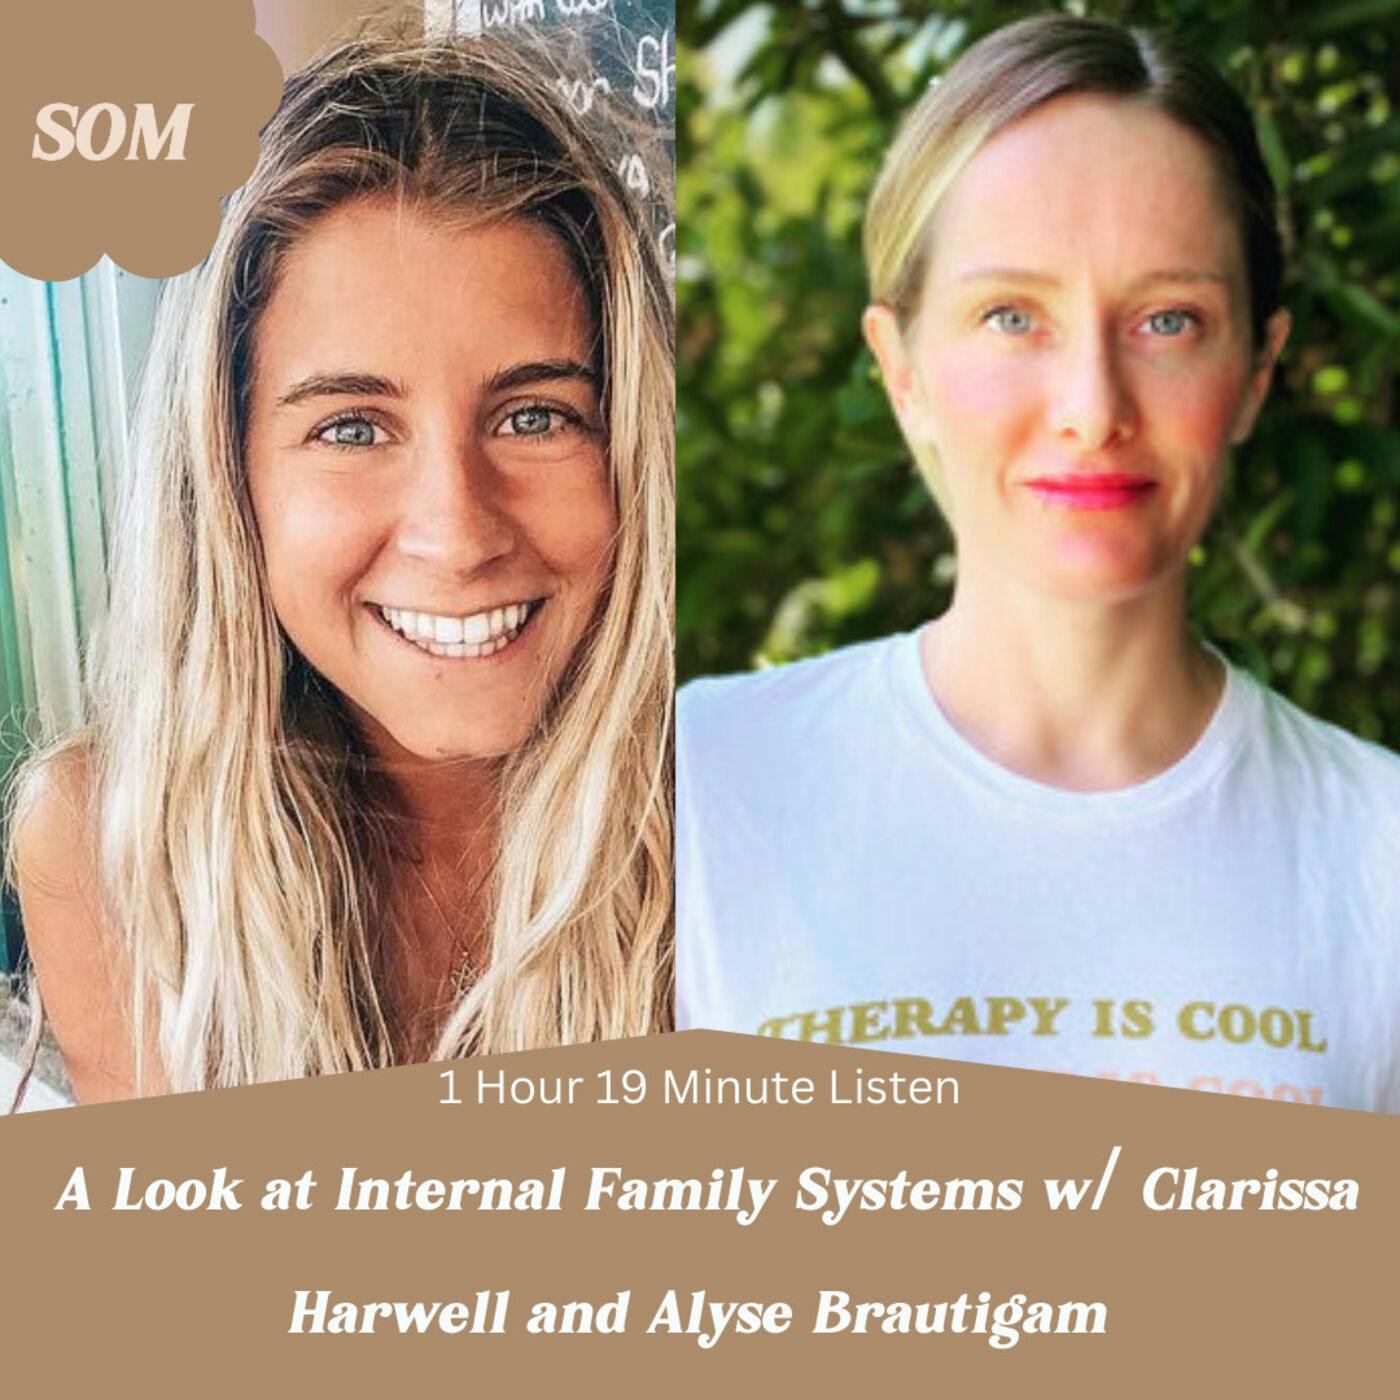 A Look at Internal Family Systems w/ Clarissa Harwell and Alyse Brautigam